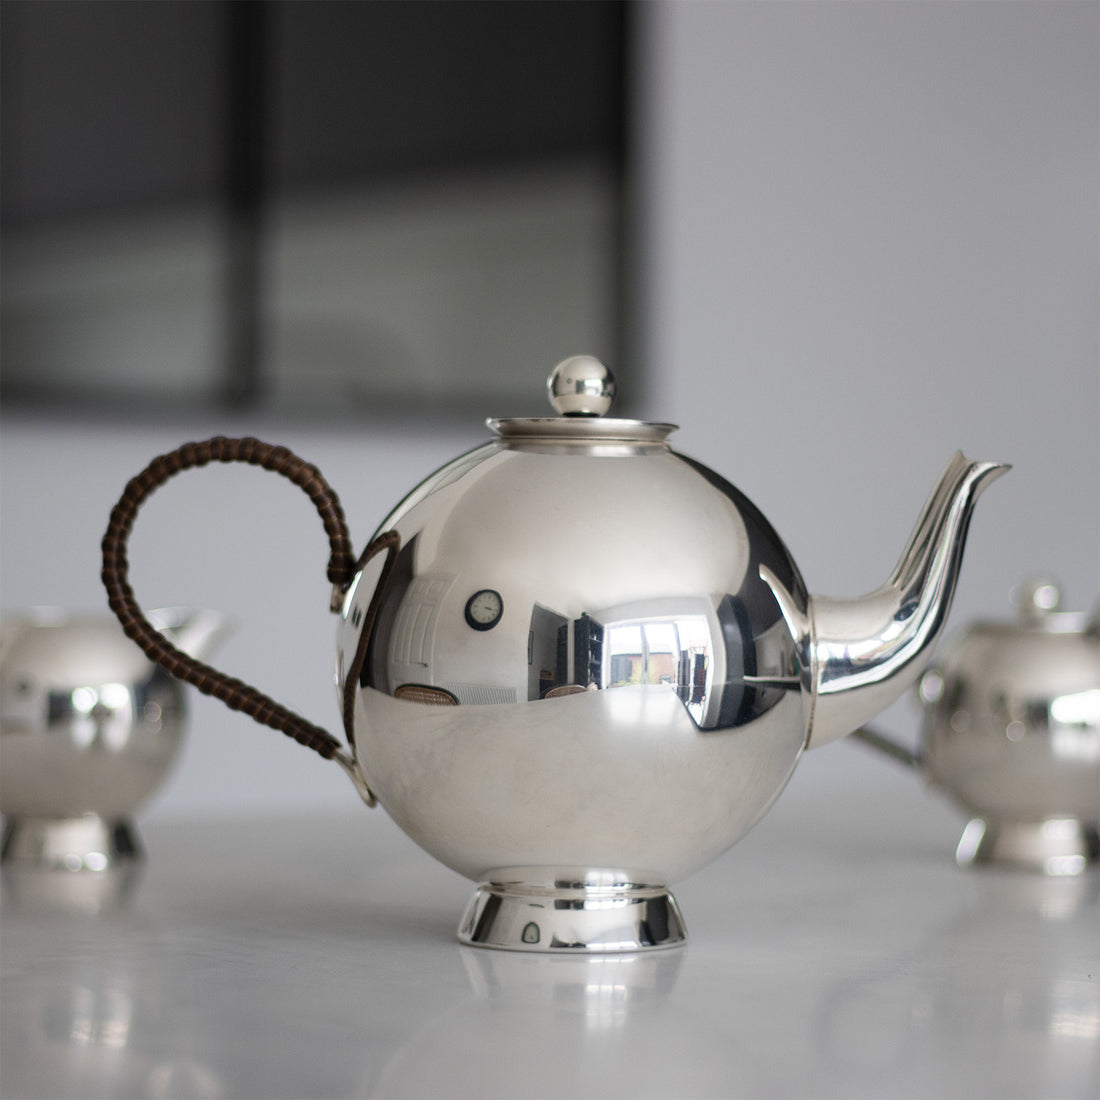 Introducing Our Silver-Plated Spheres Teaware Collection